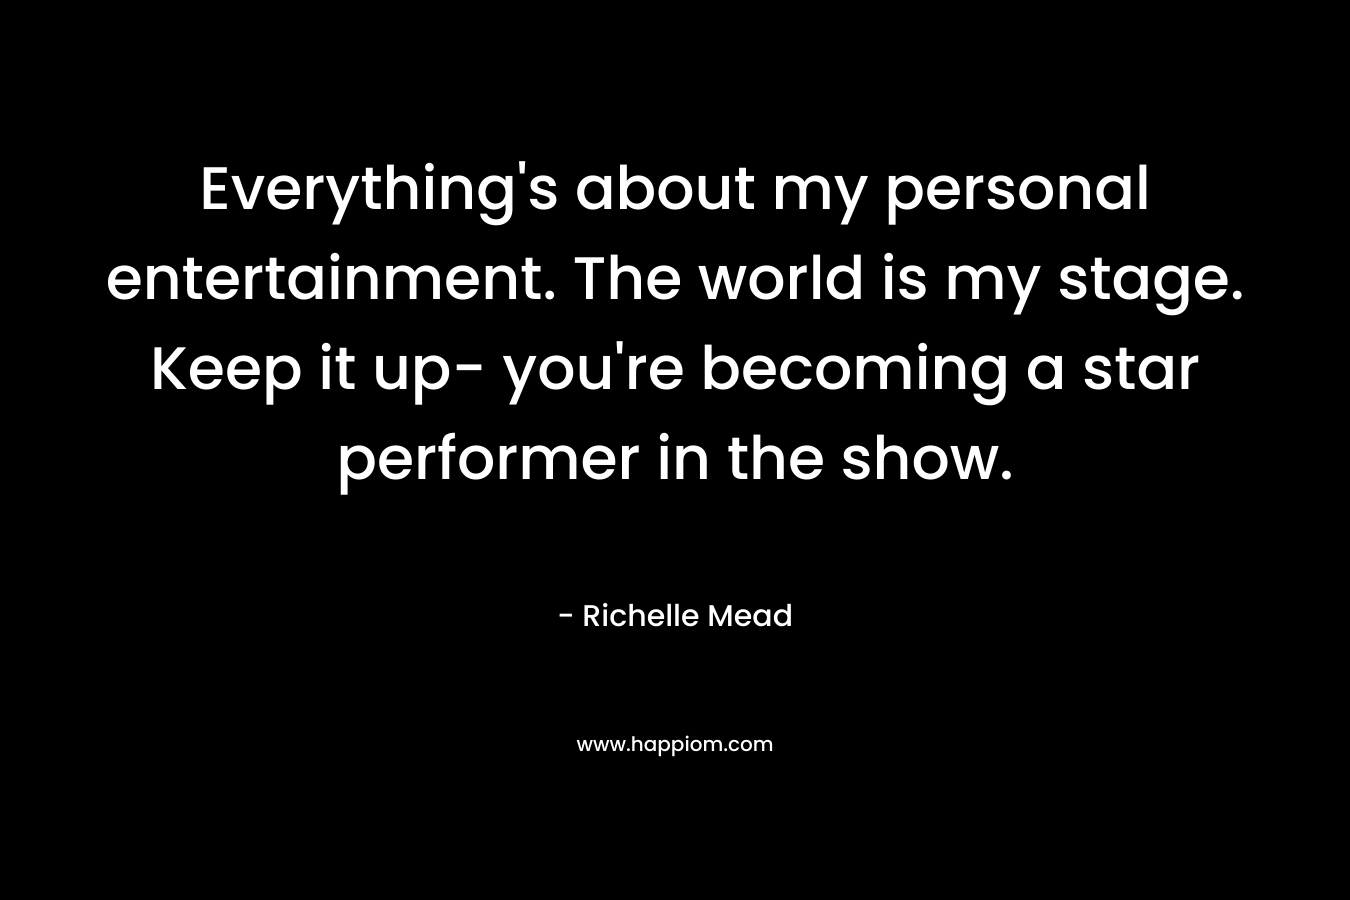 Everything's about my personal entertainment. The world is my stage. Keep it up- you're becoming a star performer in the show.